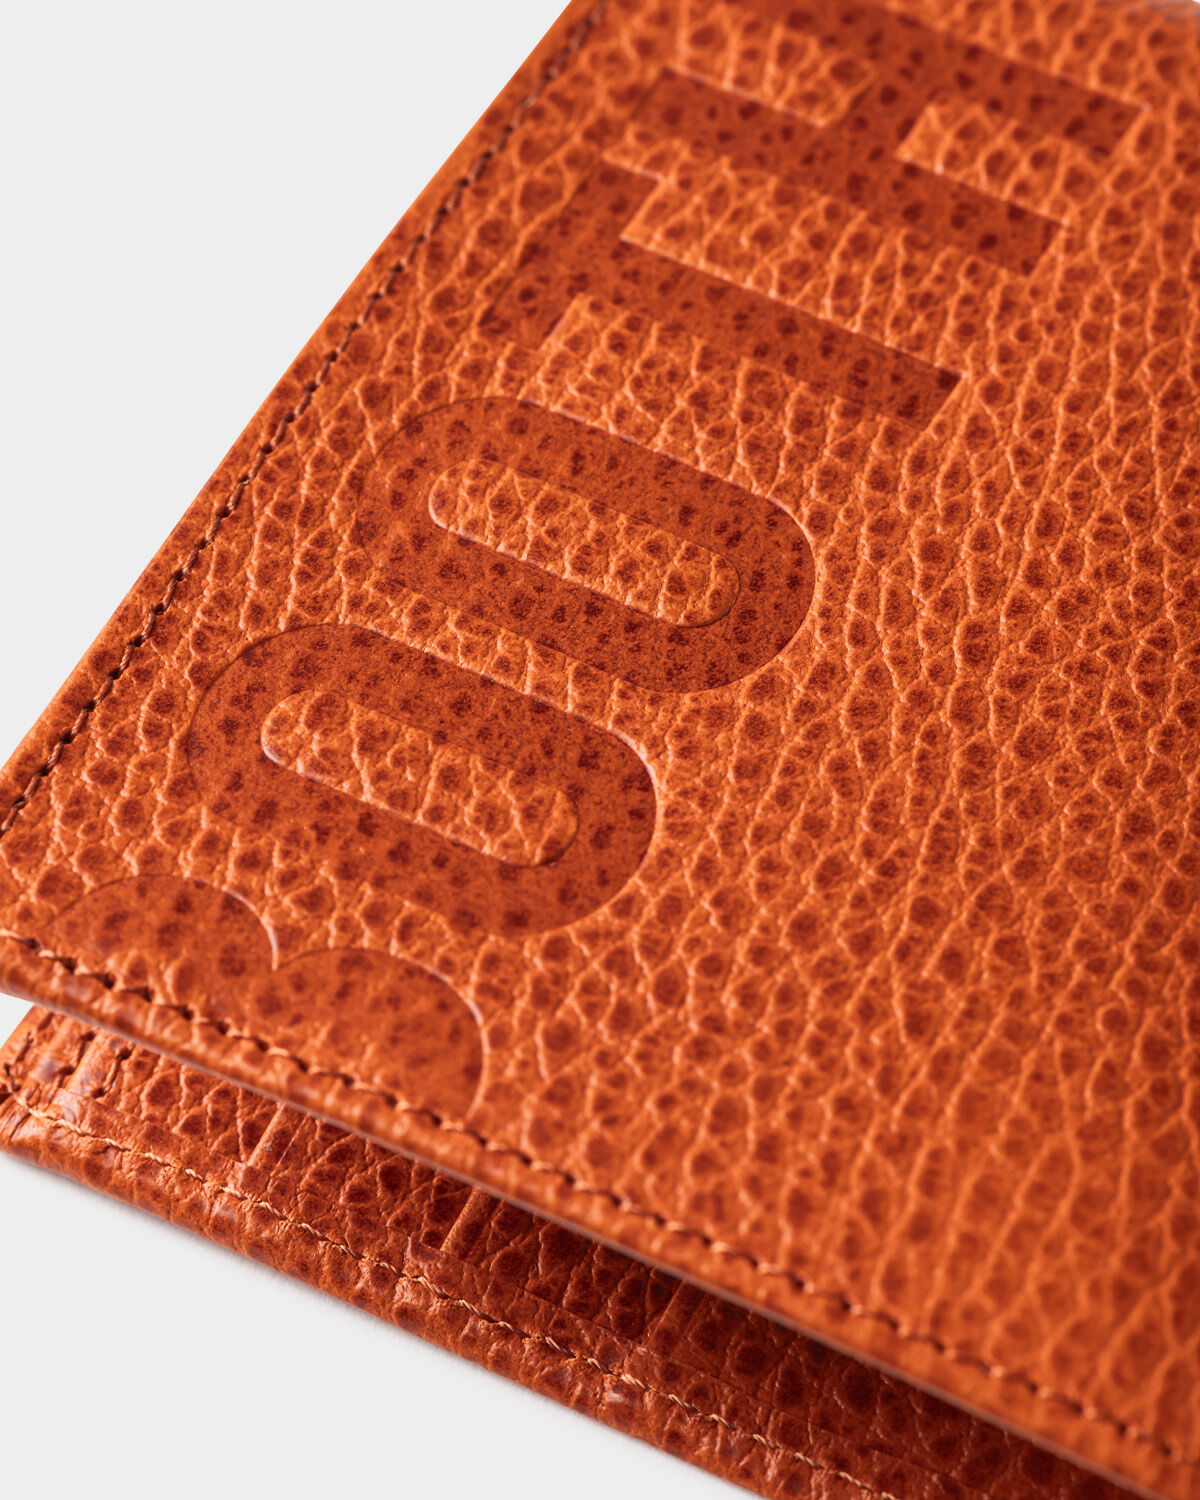 TIGHTBOOTH <LEATHER BIFOLD WALLET ORANGE> | SPE...